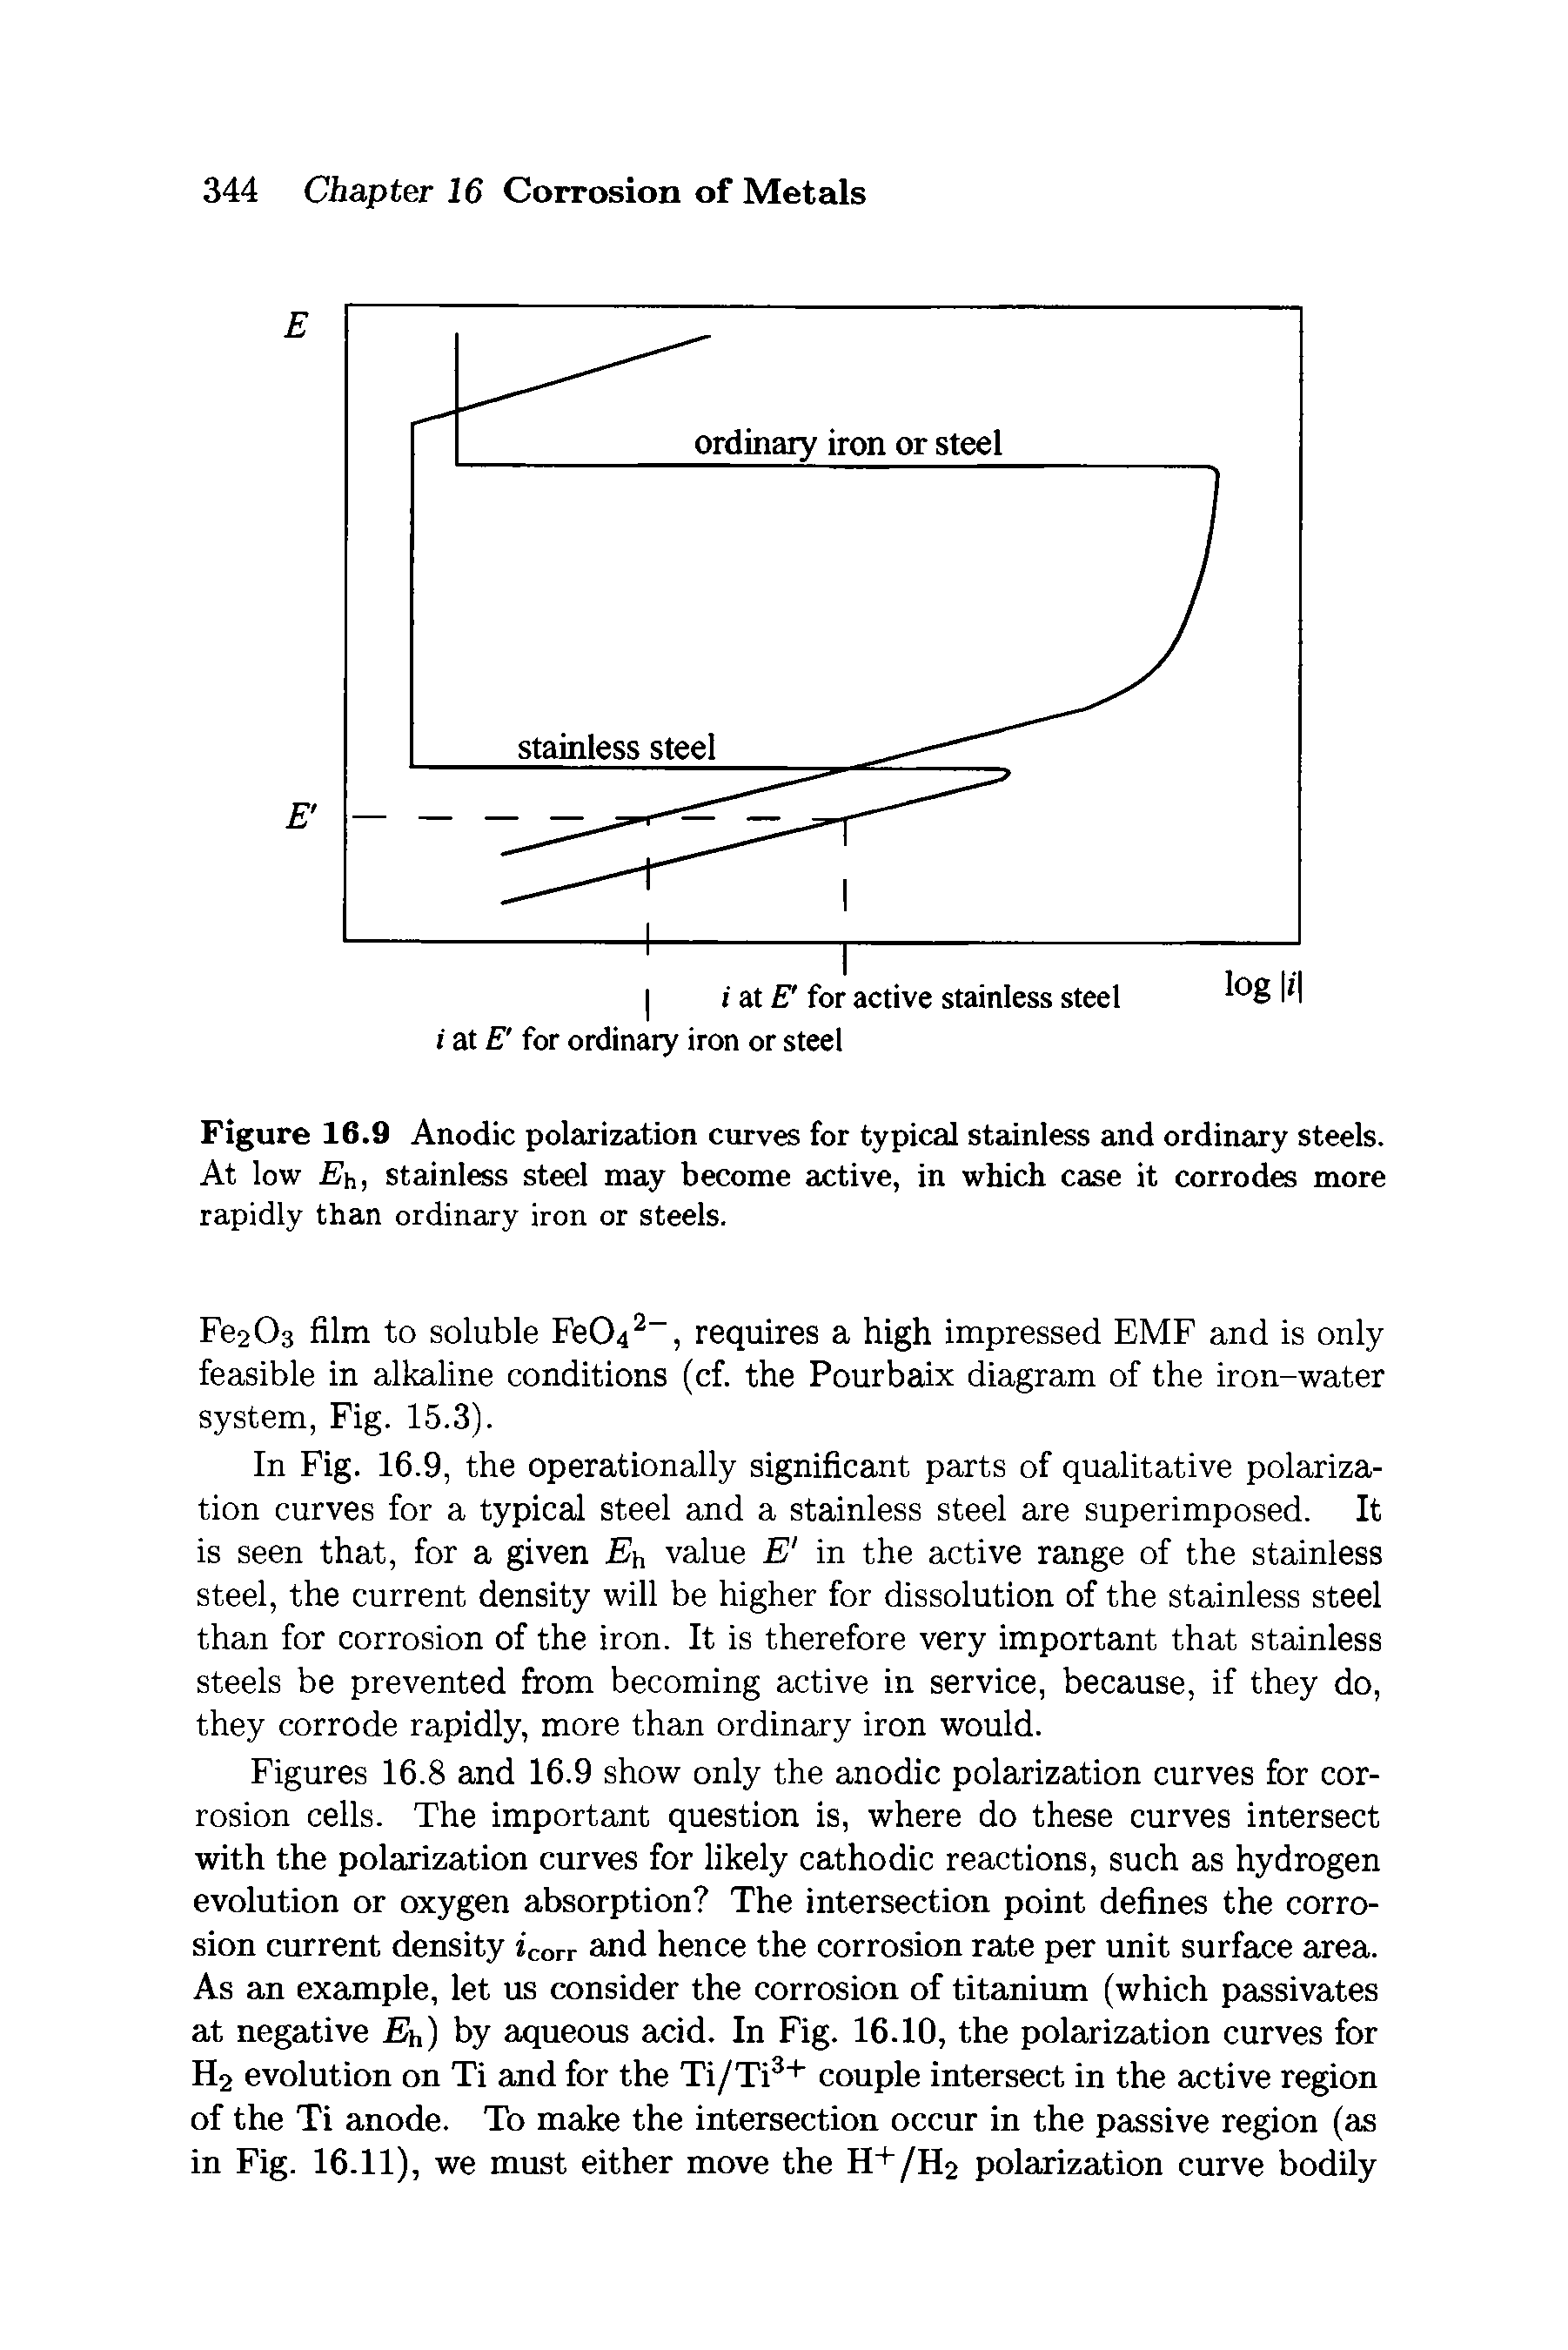 Figure 16.9 Anodic polarization curves for typical stainless and ordinary steels. At low Eh, stainless steel may become active, in which case it corrodes more rapidly than ordinary iron or steels.